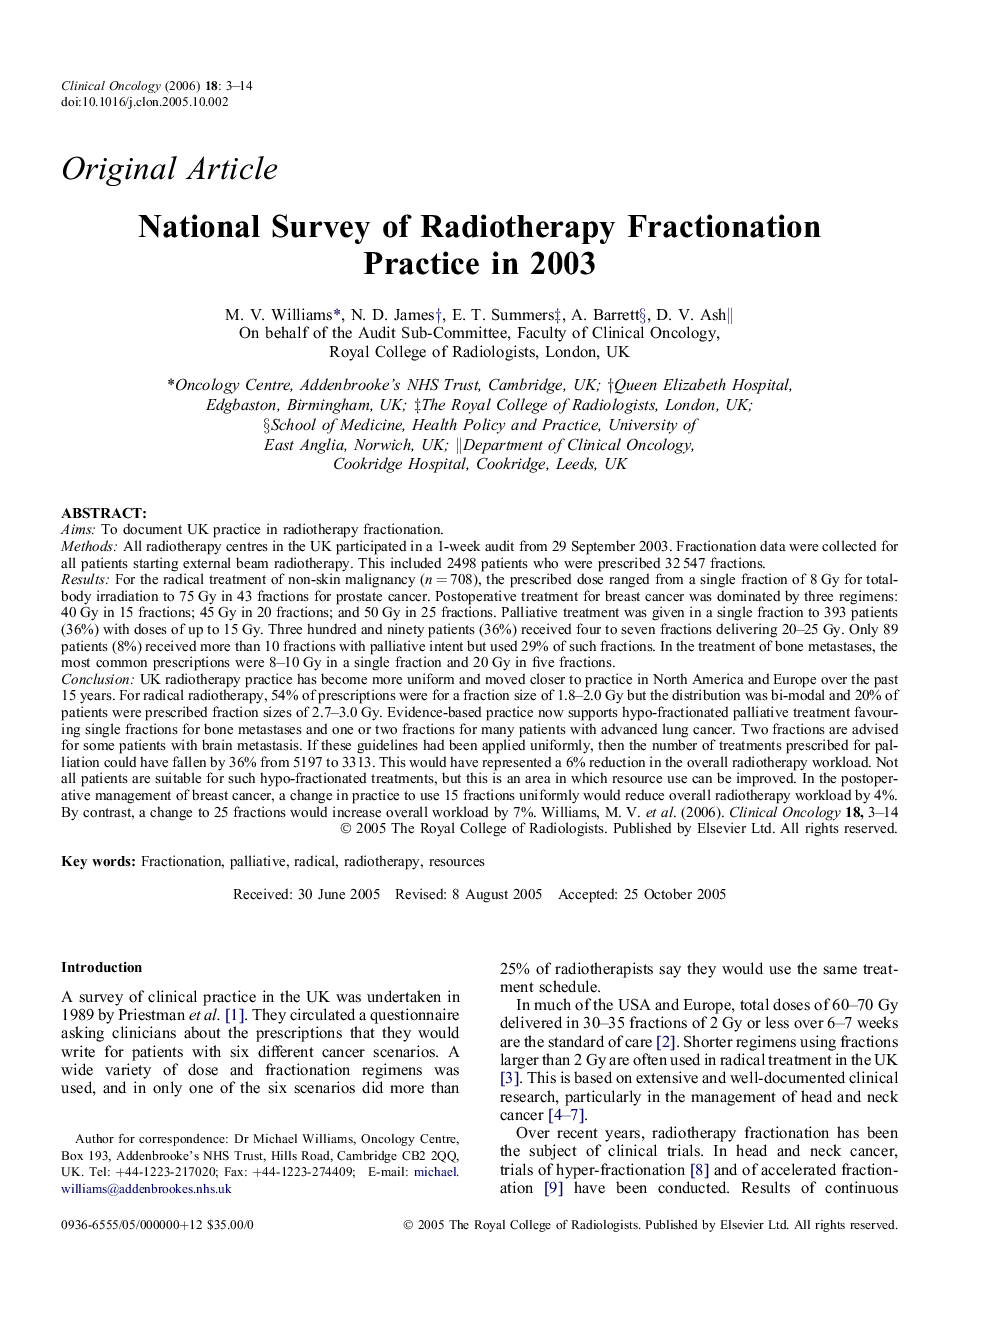 National Survey of Radiotherapy Fractionation Practice in 2003